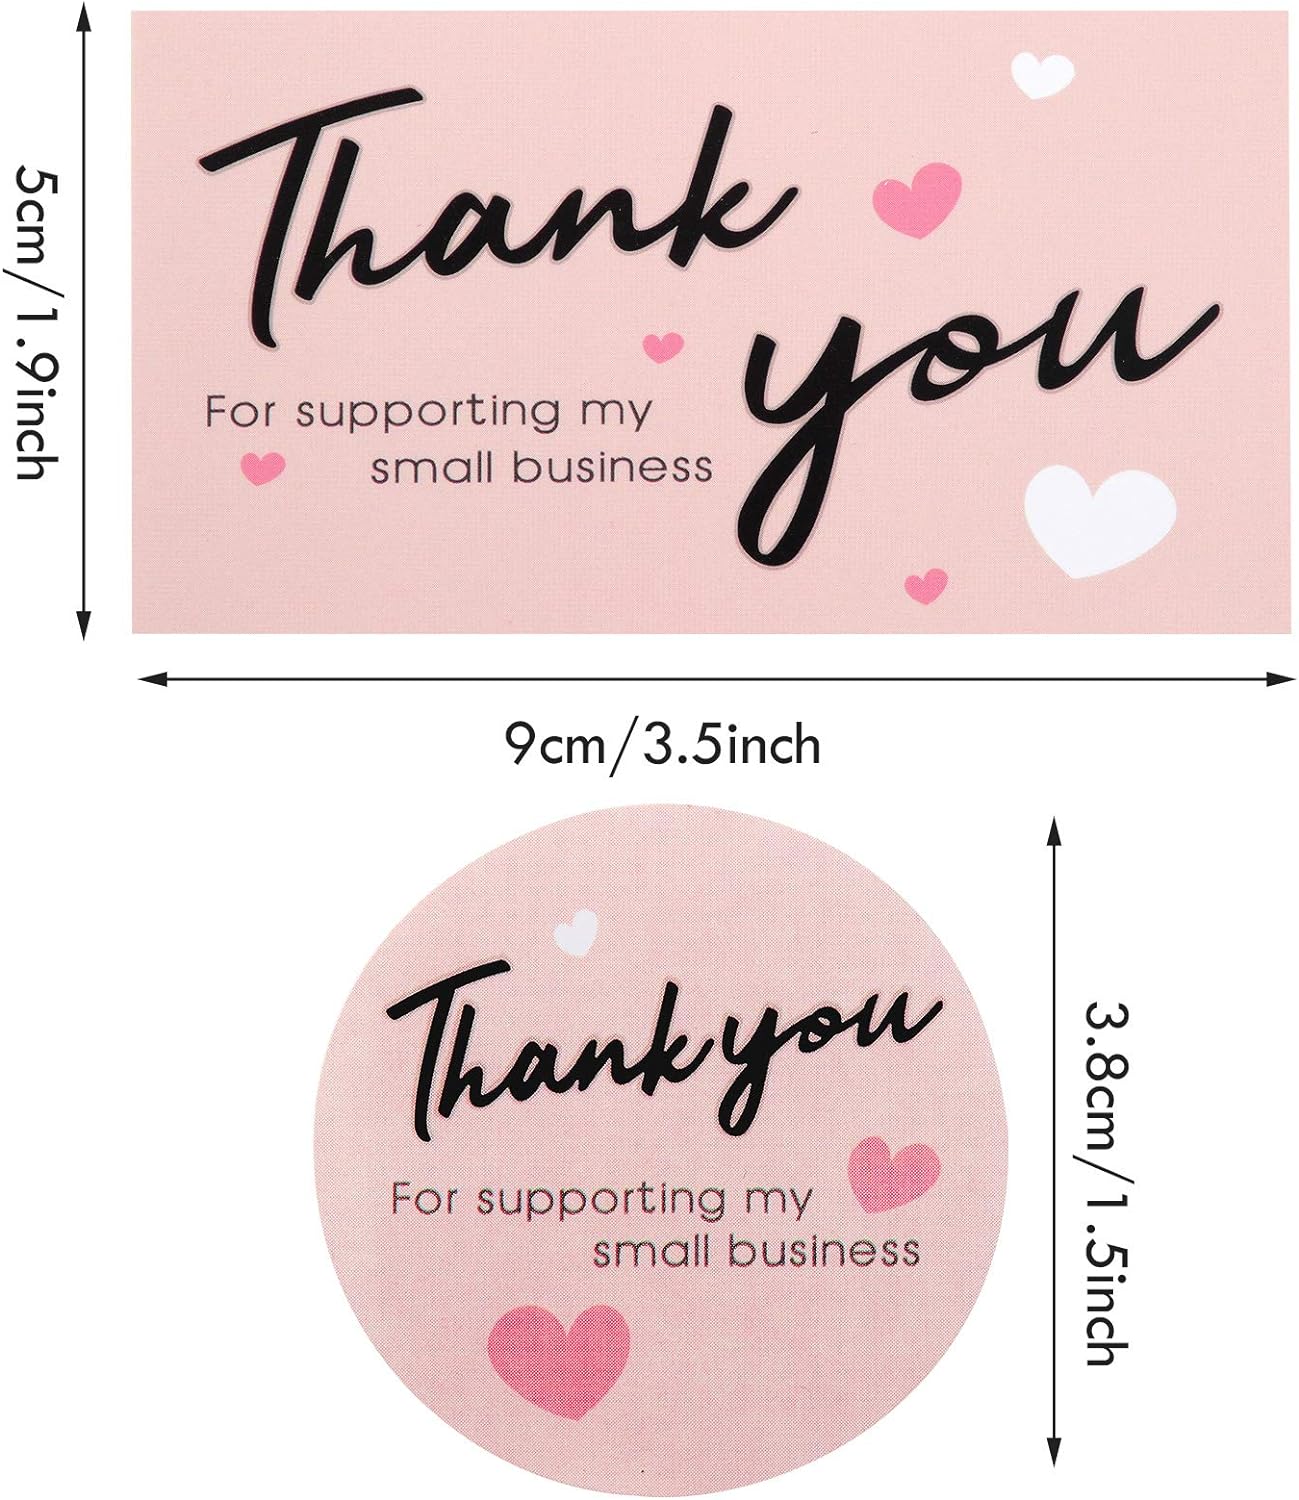 100 Pieces Thank You for Supporting My Small Business Card and 500 Pieces Stickers - TTpen